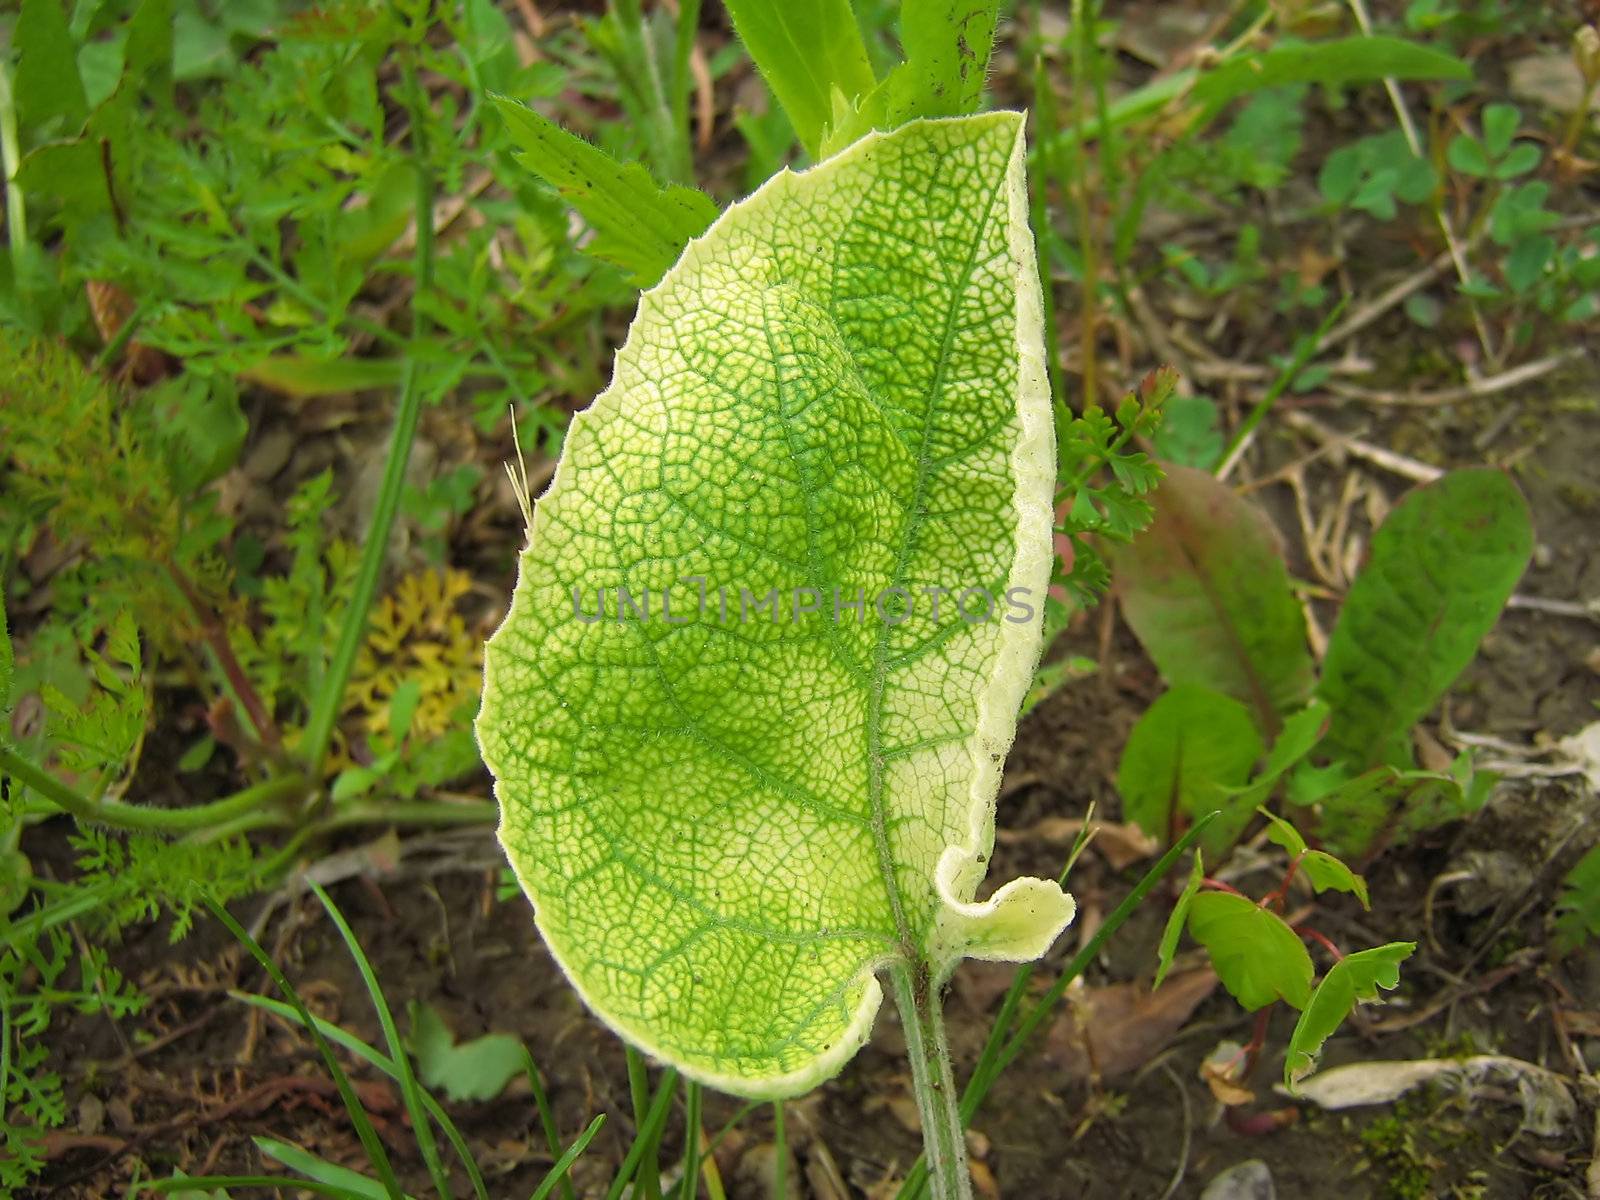 This is a photograph of a Common Burdock (Articum minus) leaf detailing it's unusual texture. The Common Burdock is a biennial flowering plant of the family Asteraceae. A plant of European origin, it is found throughout the continental United States. Habitats include woodland edges, thickets, weedy meadows and roadsides.